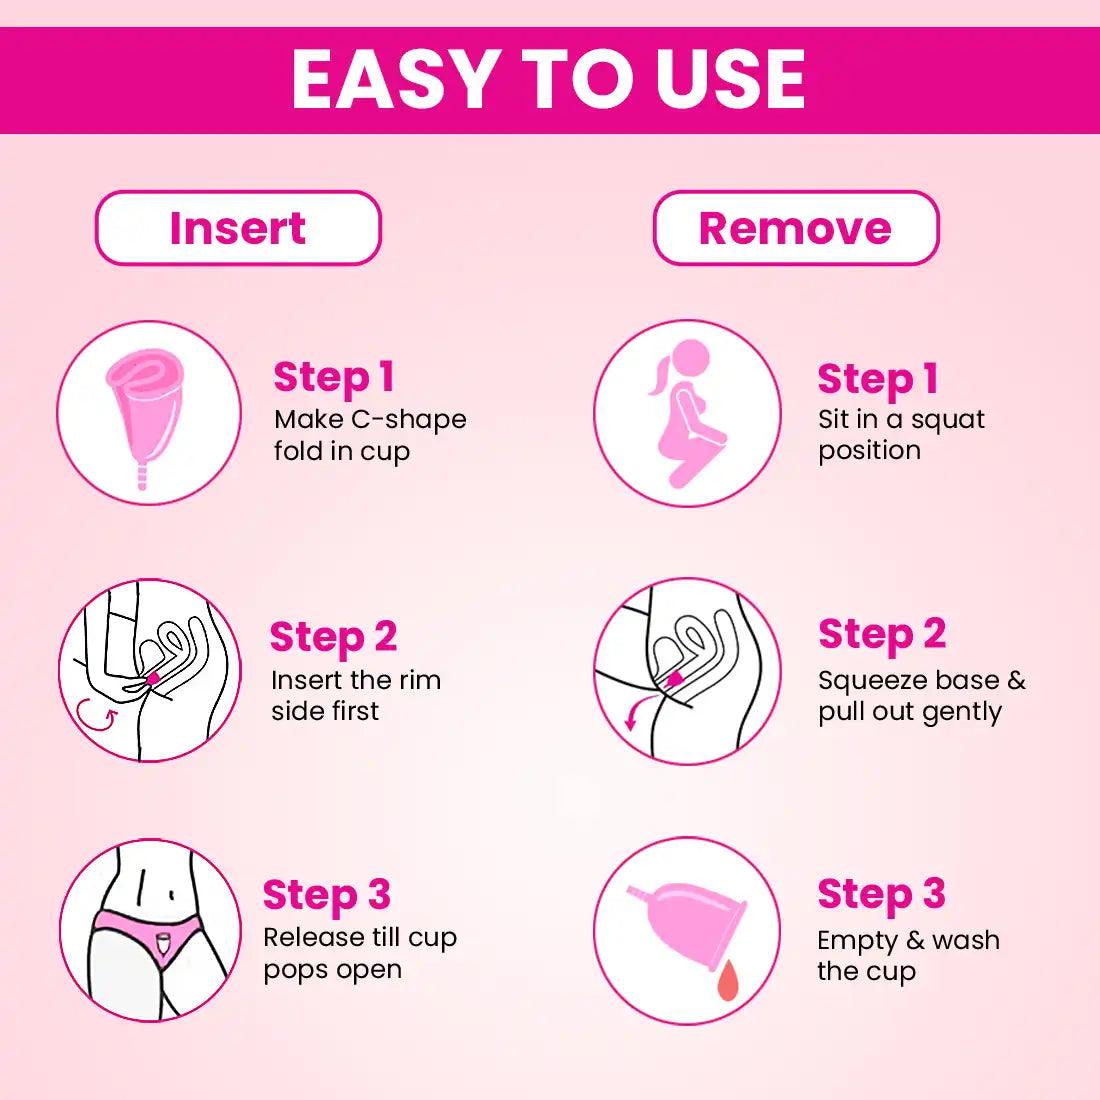 everteen Menstrual Cup for Periods - Odor-Free, Rash-Free, No Leakage, 12-Hour Protection, Reusable For Up To 10 Years, Medical-Grade Silicone, Free Pouch - Sanitary Cup for Feminine Hygiene - everteen-neud.com